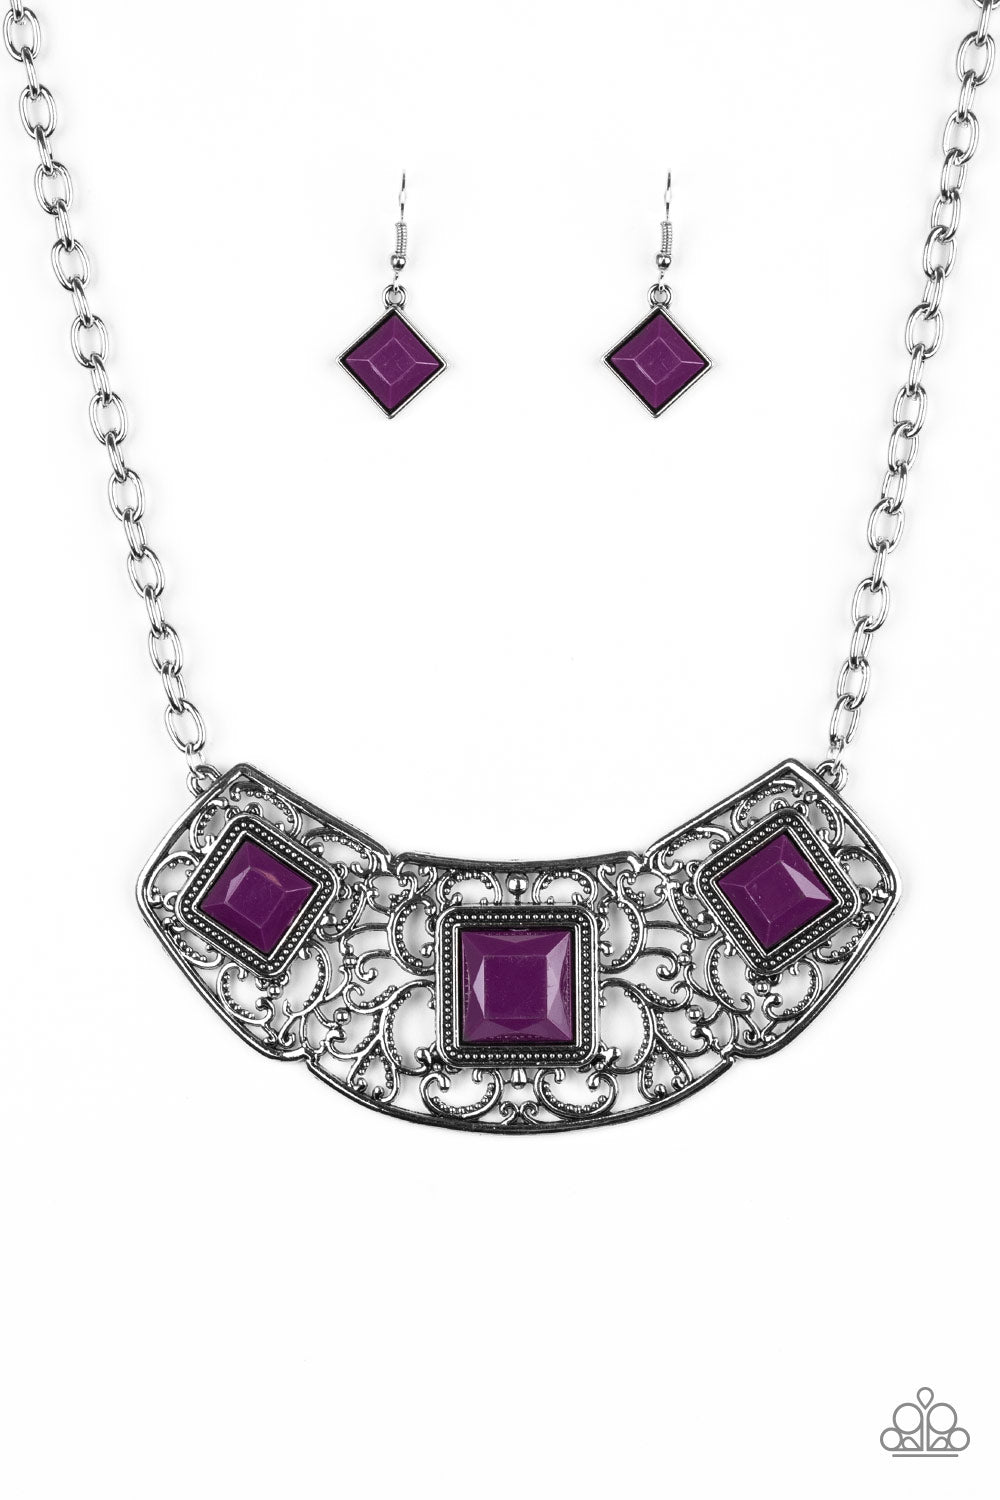 Feeling Inde-PENDANT - Purple and Silver Fashion Necklace - Paparazzi Accessories - Glistening silver filigree spins into a dramatic pendant below the collar. Square plum beads are pressed into the airy frame for a colorful finish. Features an adjustable clasp closure. Sold as one individual necklace.